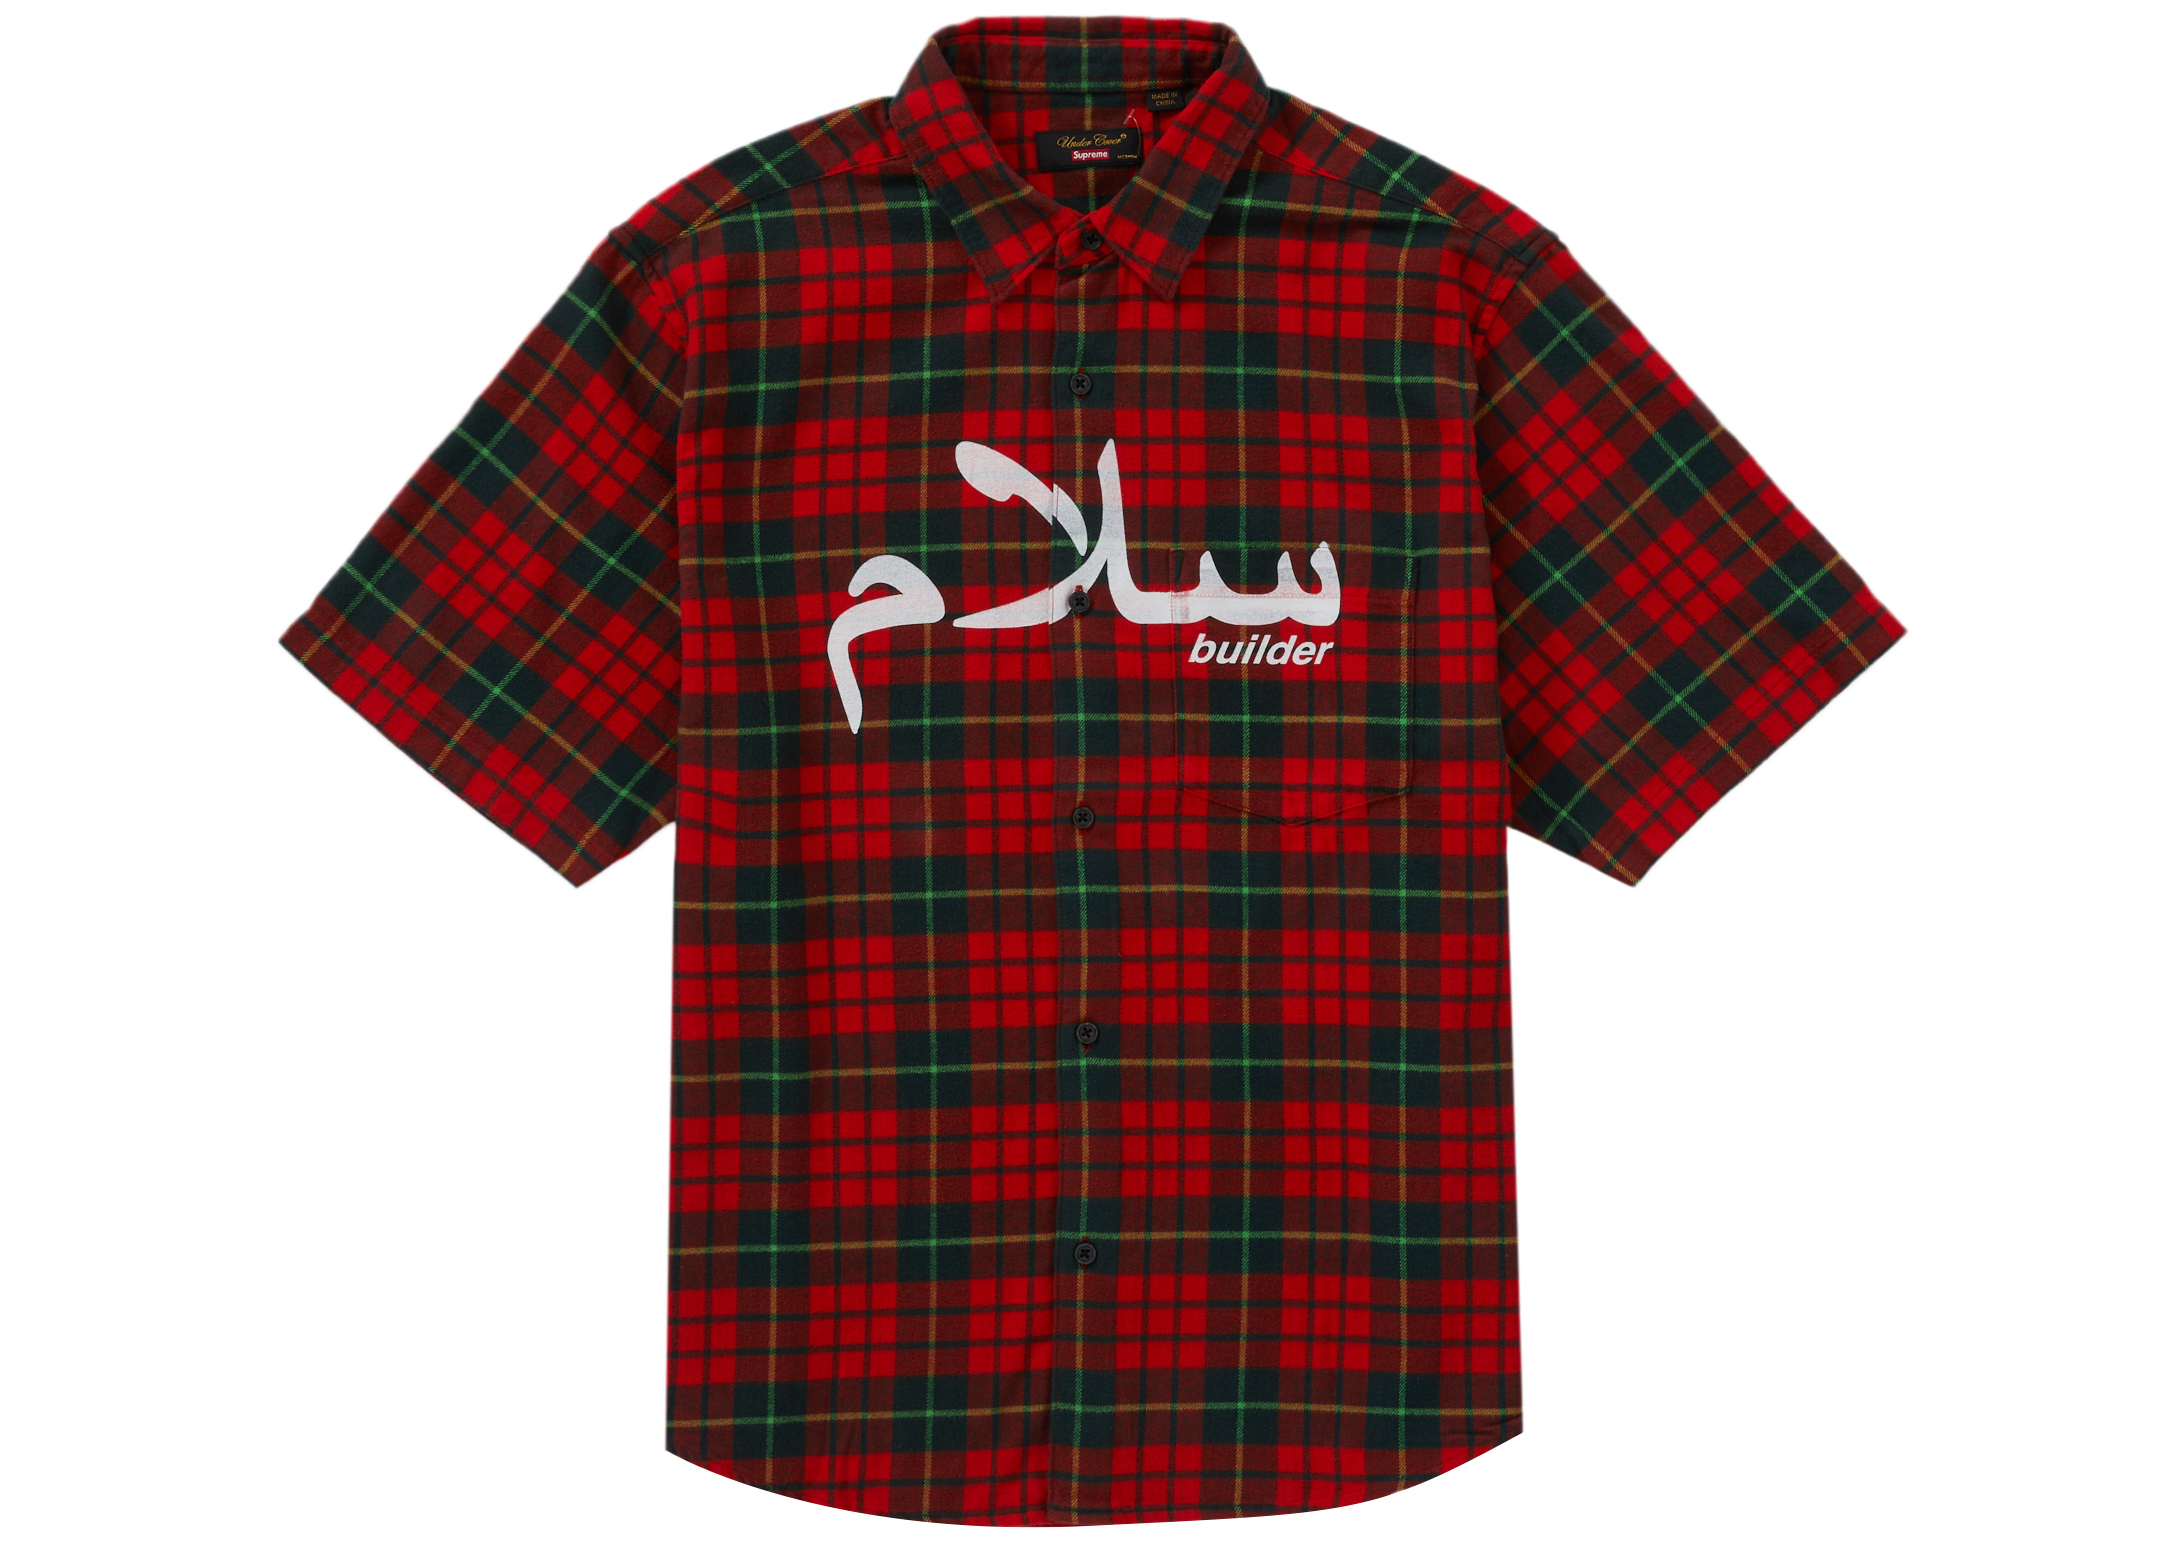 Supreme Undercover S/S Flannel Shirt Red